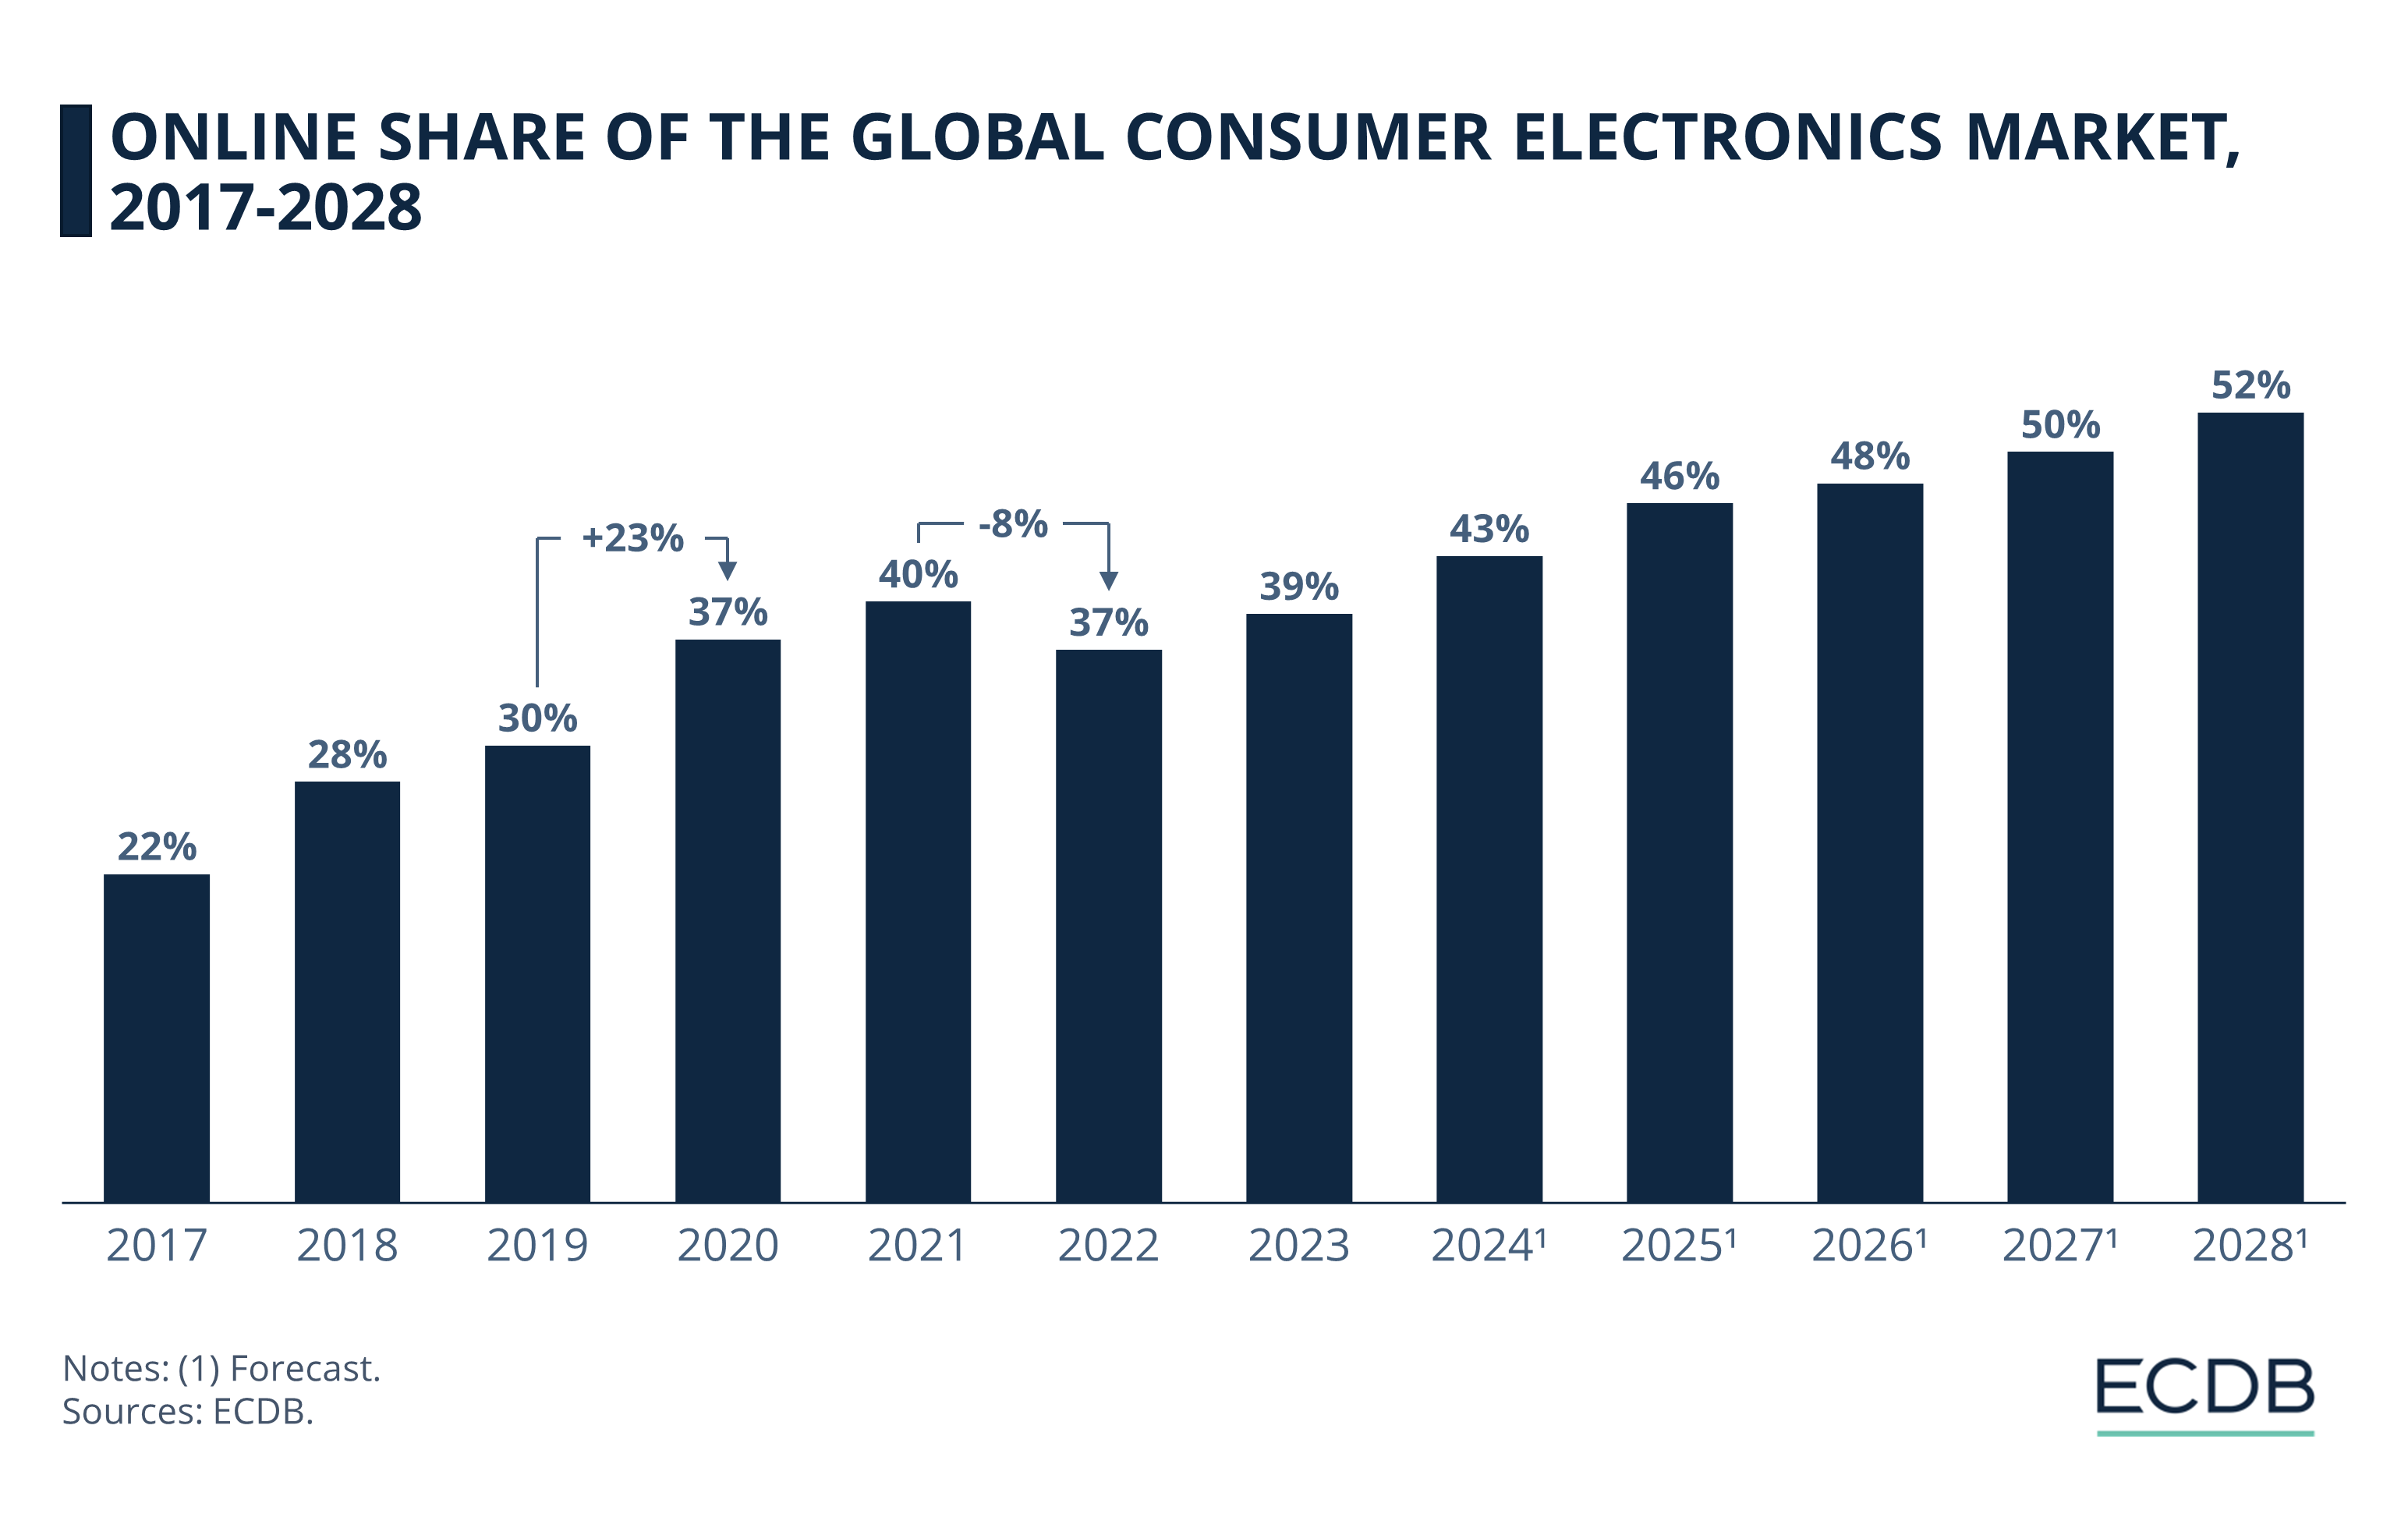 Online Share of the Global Consumer Electronics Market, 2017-2028